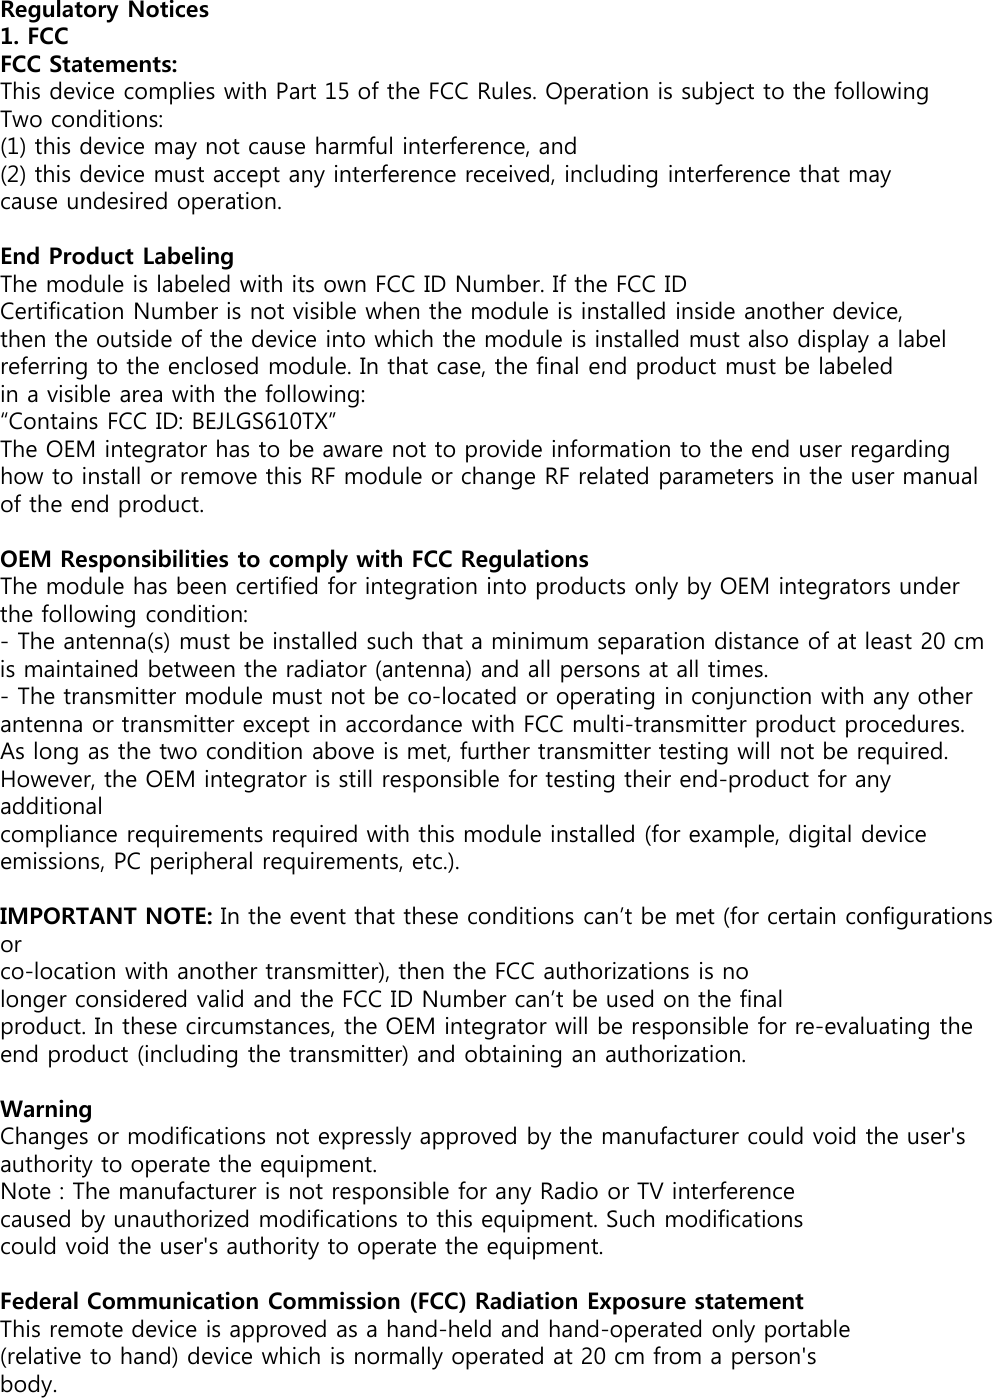 Regulatory Notices1. FCCFCC Statements:This device complies with Part 15 of the FCC Rules. Operation is subject to the following Two conditions:(1) this device may not cause harmful interference, and(2) this device must accept any interference received, including interference that maycause undesired operation.End Product LabelingThe module is labeled with its own FCC ID Number. If the FCC IDCertification Number is not visible when the module is installed inside another device, then the outside of the device into which the module is installed must also display a label referring to the enclosed module. In that case, the final end product must be labeled in a visible area with the following:“Contains FCC ID: BEJLGS610TX”The OEM integrator has to be aware not to provide information to the end user regarding how to install or remove this RF module or change RF related parameters in the user manual of the end product.OEM Responsibilities to comply with FCC RegulationsThe module has been certified for integration into products only by OEM integrators under the following condition:- The antenna(s) must be installed such that a minimum separation distance of at least 20 cm is maintained between the radiator (antenna) and all persons at all times.- The transmitter module must not be co-located or operating in conjunction with any other antenna or transmitter except in accordance with FCC multi-transmitter product procedures. As long as the two condition above is met, further transmitter testing will not be required. However, the OEM integrator is still responsible for testing their end-product for any additionalcompliance requirements required with this module installed (for example, digital device emissions, PC peripheral requirements, etc.).IMPORTANT NOTE: In the event that these conditions can’t be met (for certain configurations orco-location with another transmitter), then the FCC authorizations is nolonger considered valid and the FCC ID Number can’t be used on the finalproduct. In these circumstances, the OEM integrator will be responsible for re-evaluating the end product (including the transmitter) and obtaining an authorization.WarningChanges or modifications not expressly approved by the manufacturer could void the user&apos;s authority to operate the equipment.Note : The manufacturer is not responsible for any Radio or TV interferencecaused by unauthorized modifications to this equipment. Such modificationscould void the user&apos;s authority to operate the equipment.Federal Communication Commission (FCC) Radiation Exposure statementThis remote device is approved as a hand-held and hand-operated only portable (relative to hand) device which is normally operated at 20 cm from a person&apos;s body.